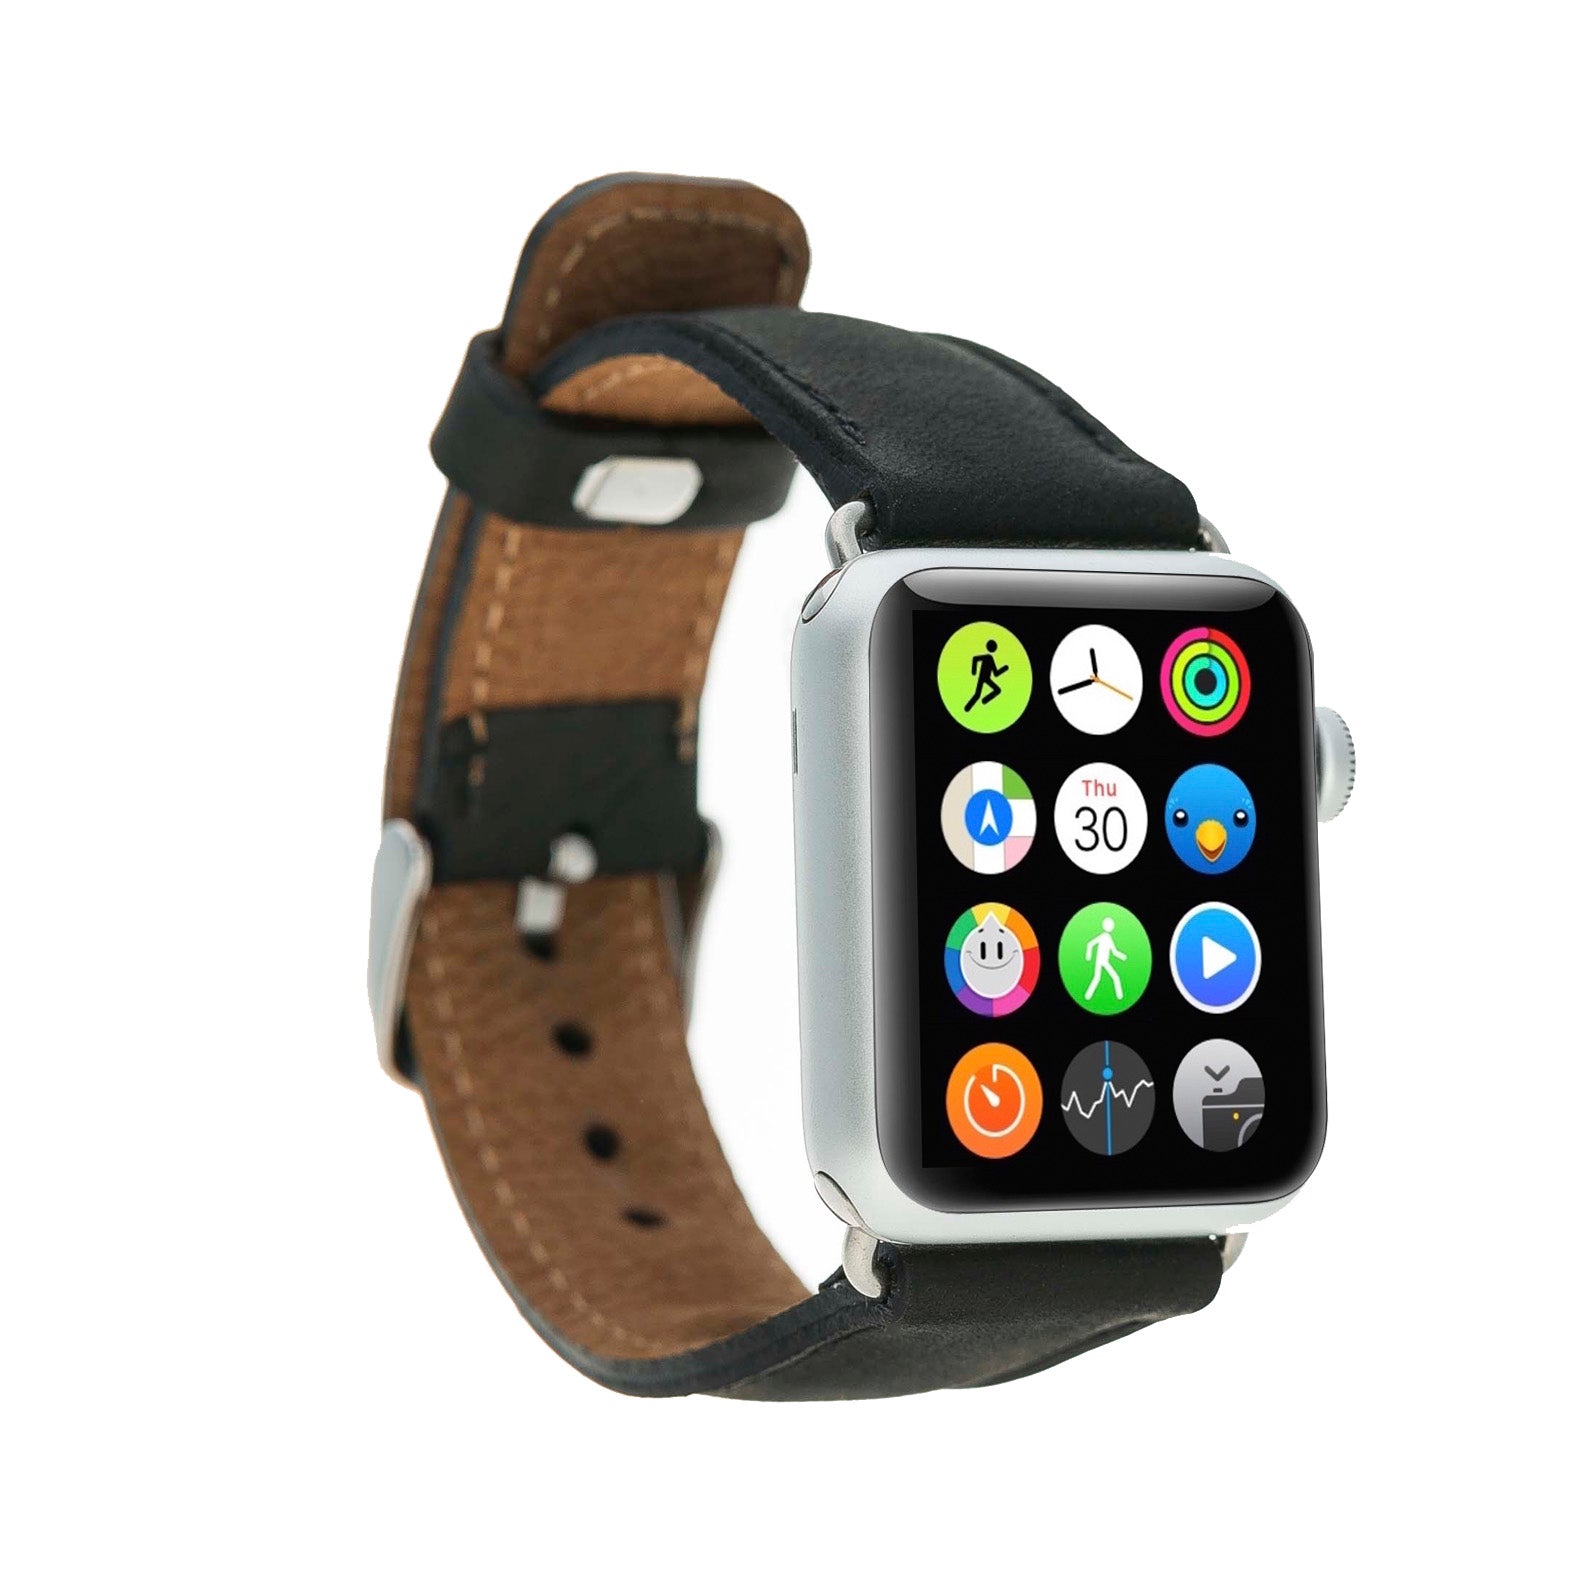 Full Grain Leather Band for Apple Watch - BLACK - saracleather